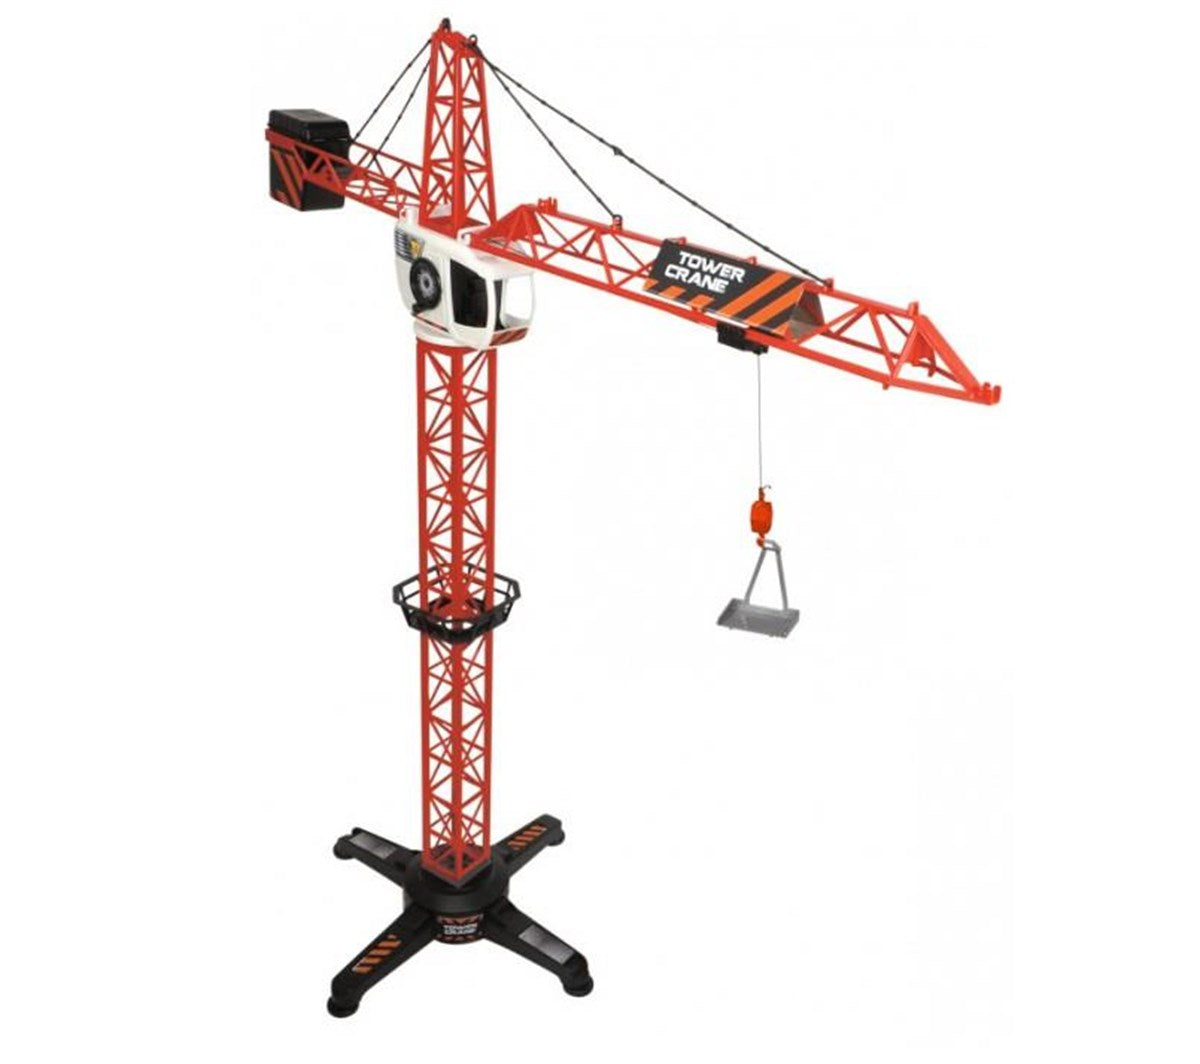 Dickie Toys 100cm Tower Crane 203462414 | Toysall